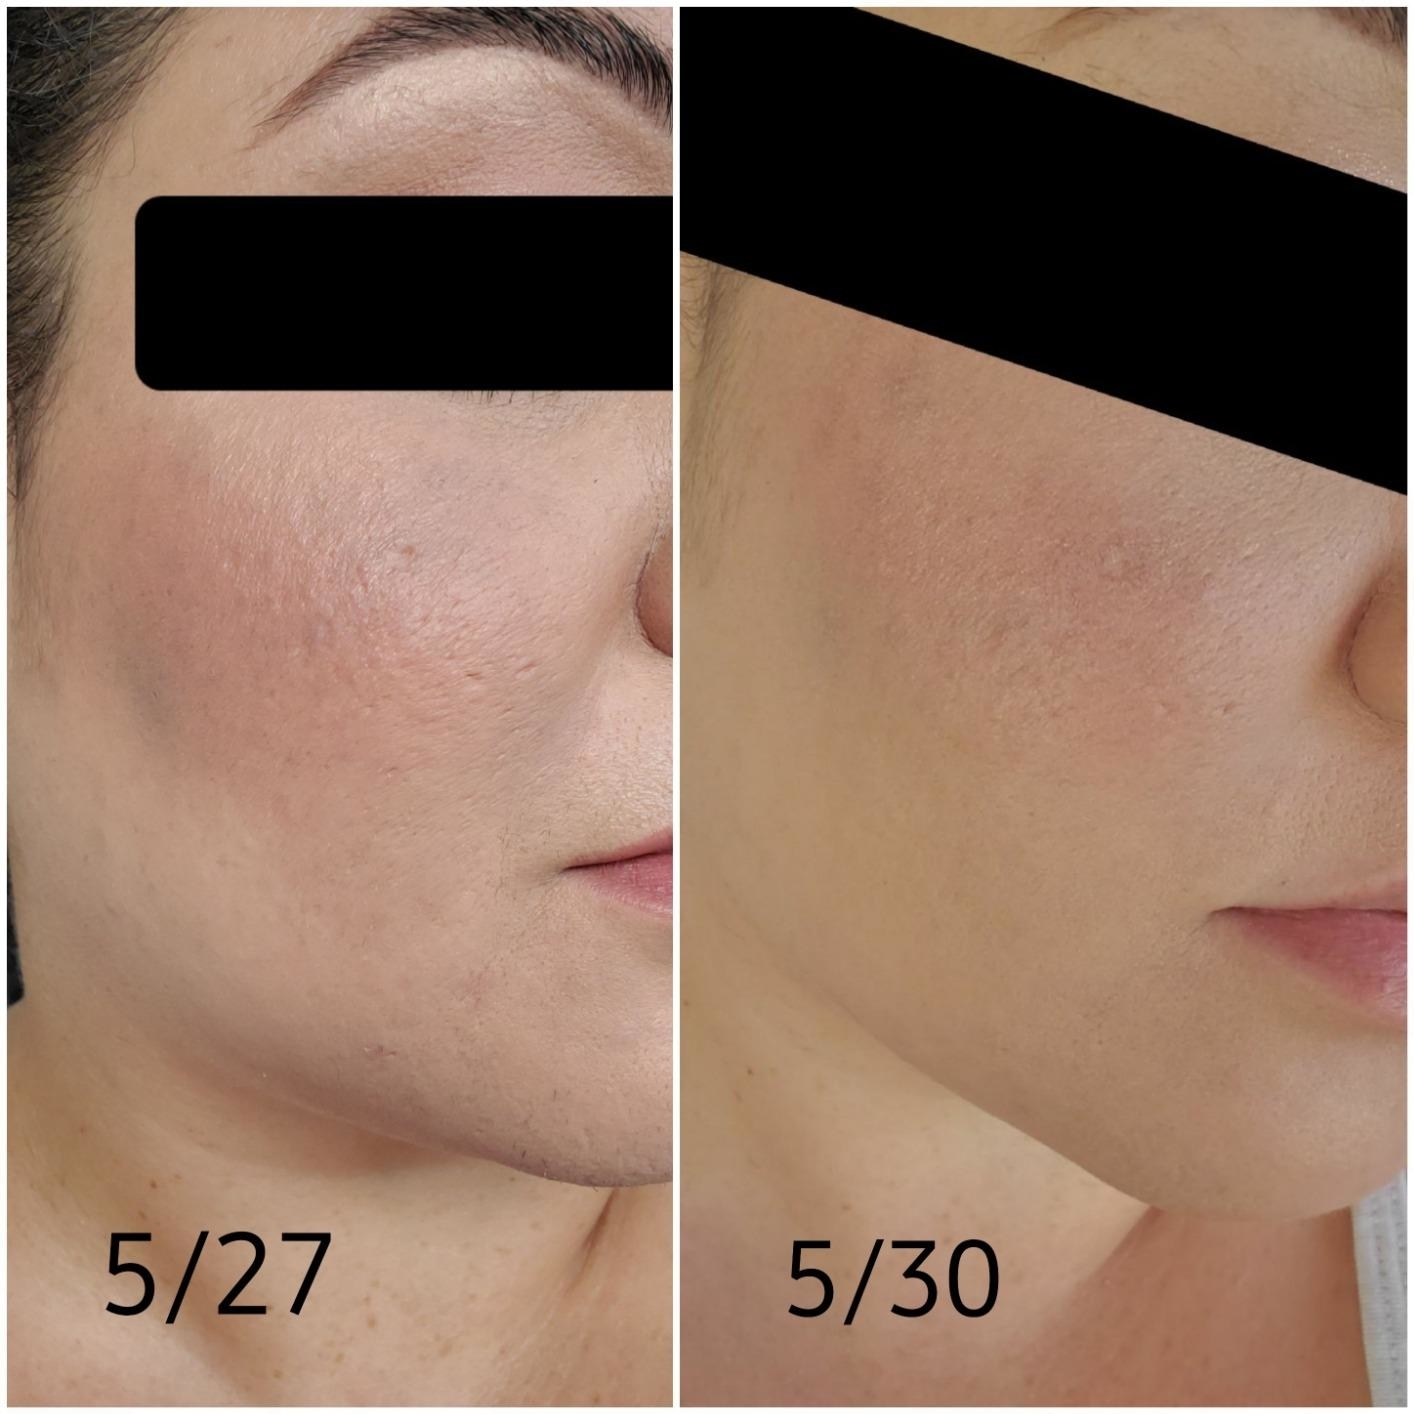 side by side photos of a reviewer with large pores and the same reviewer with shrunken pores